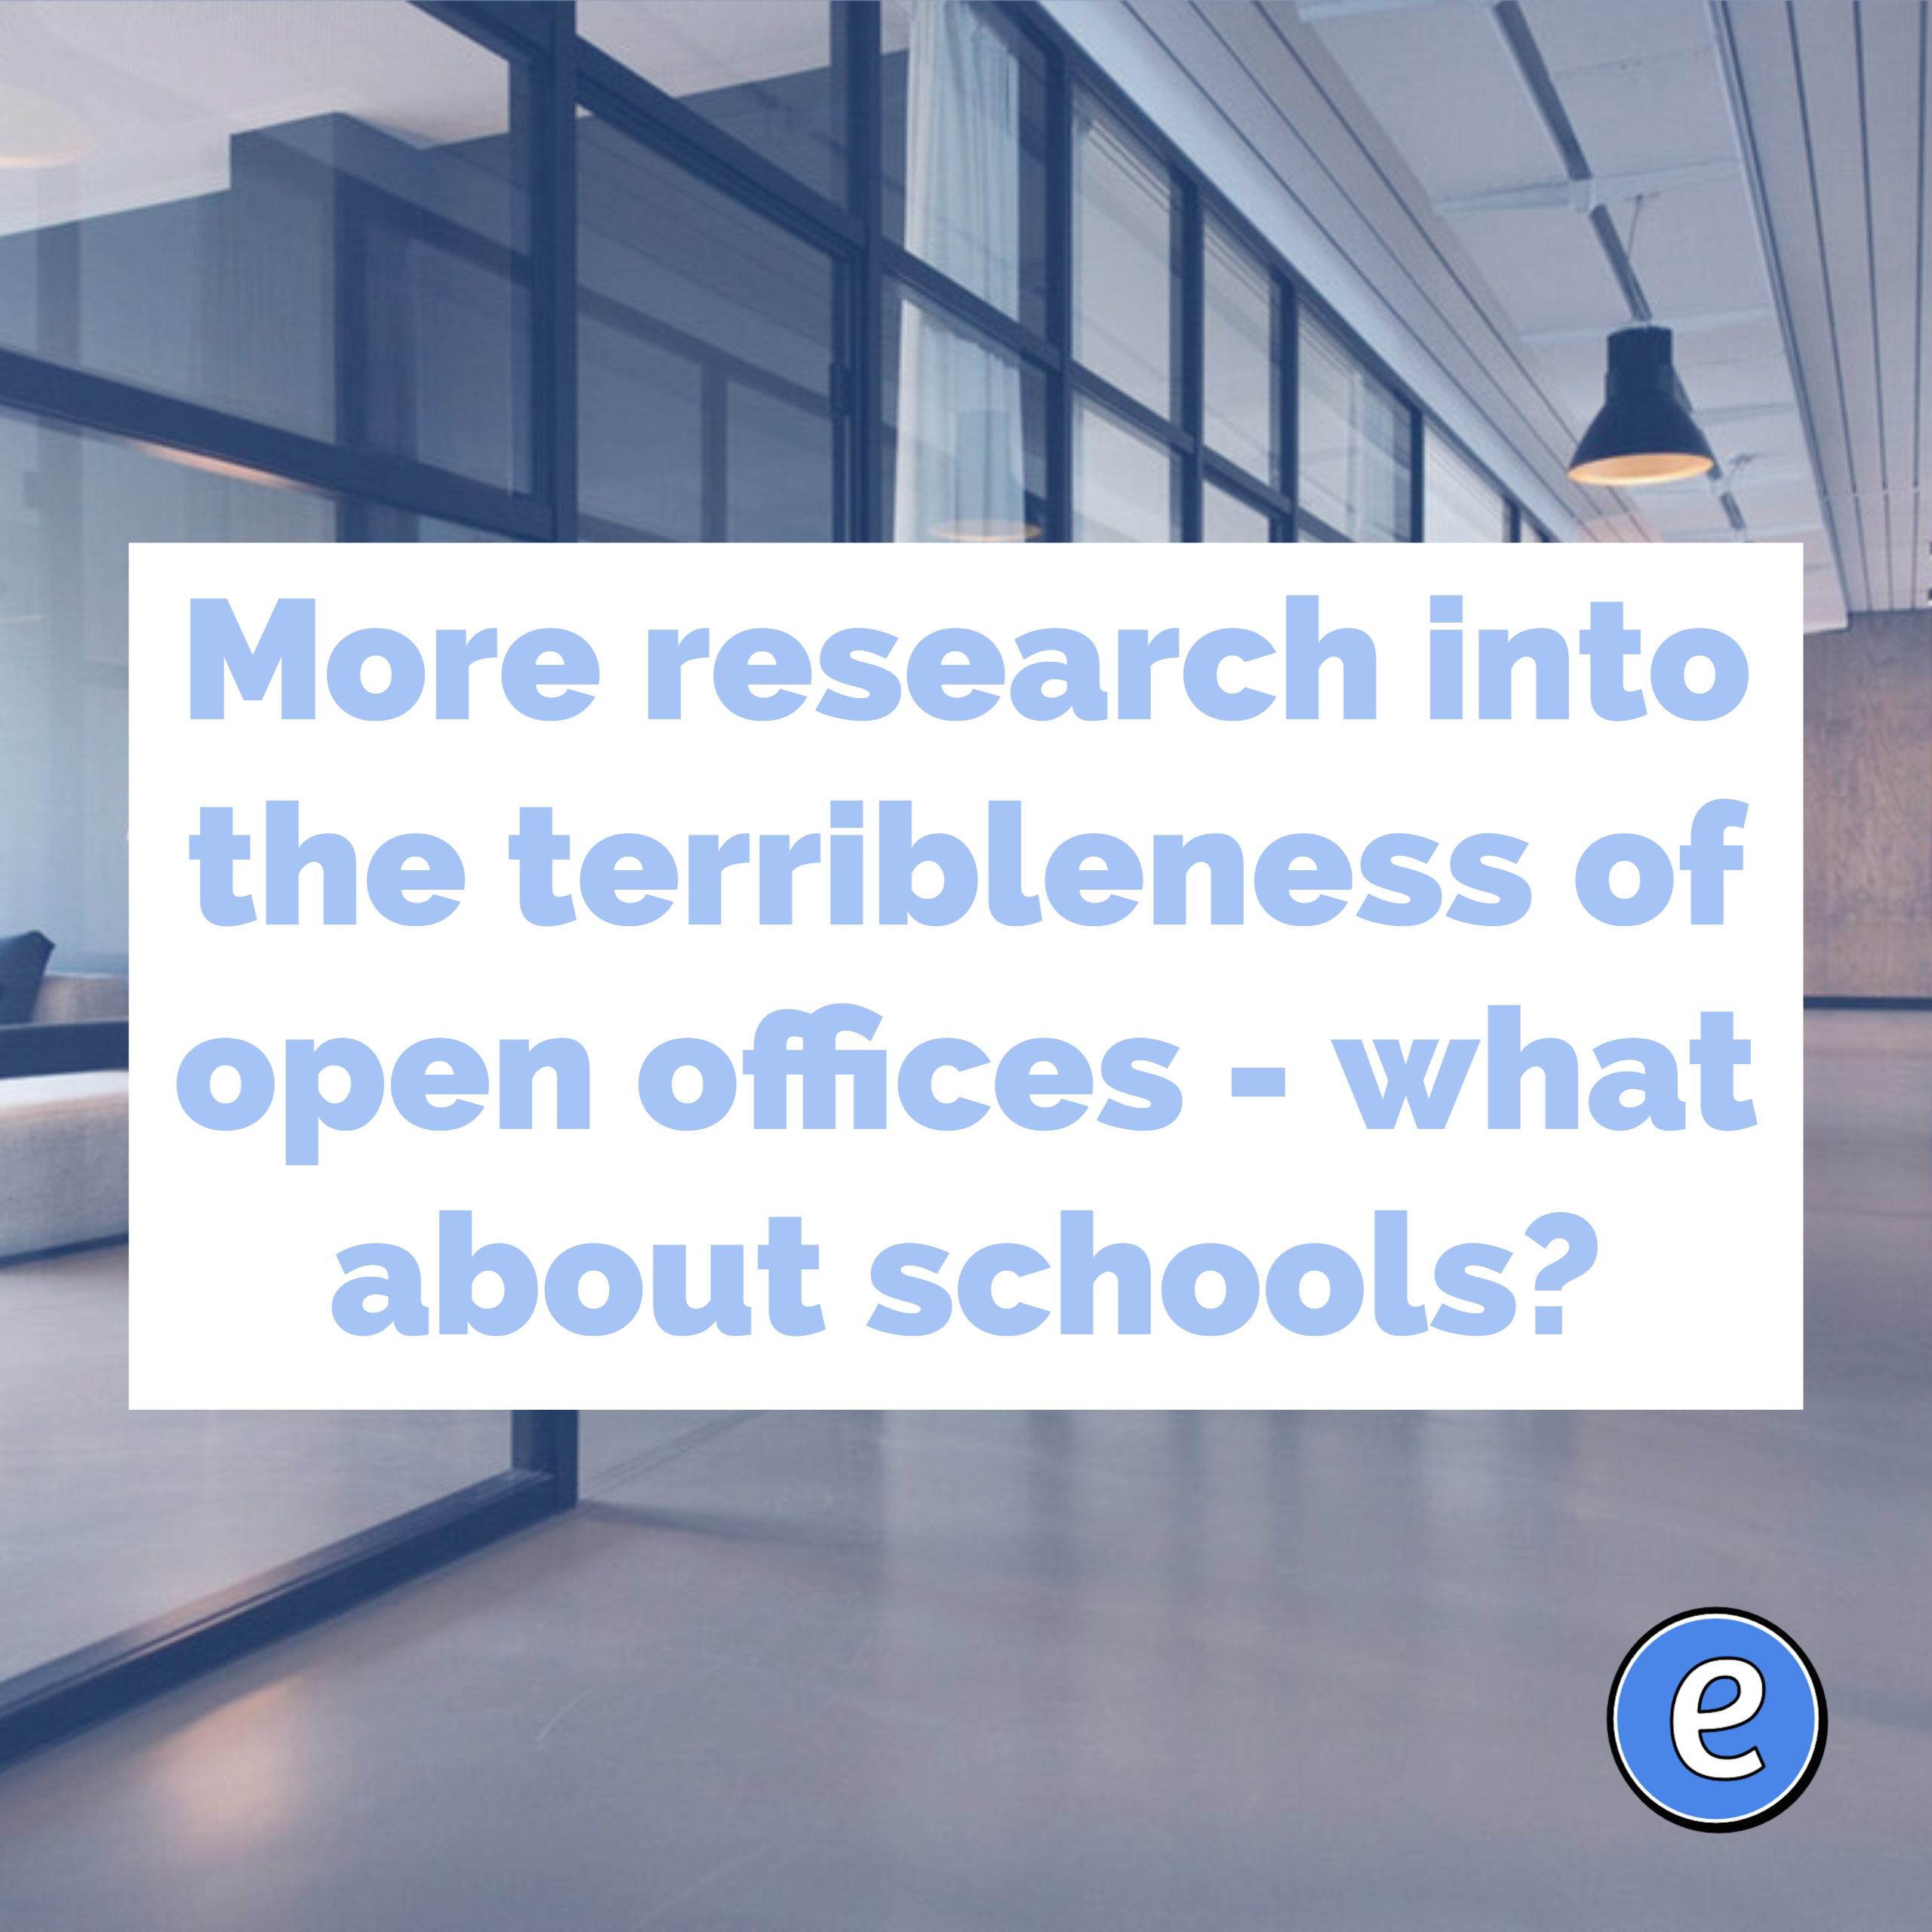 More research into the terribleness of open offices – what about schools?